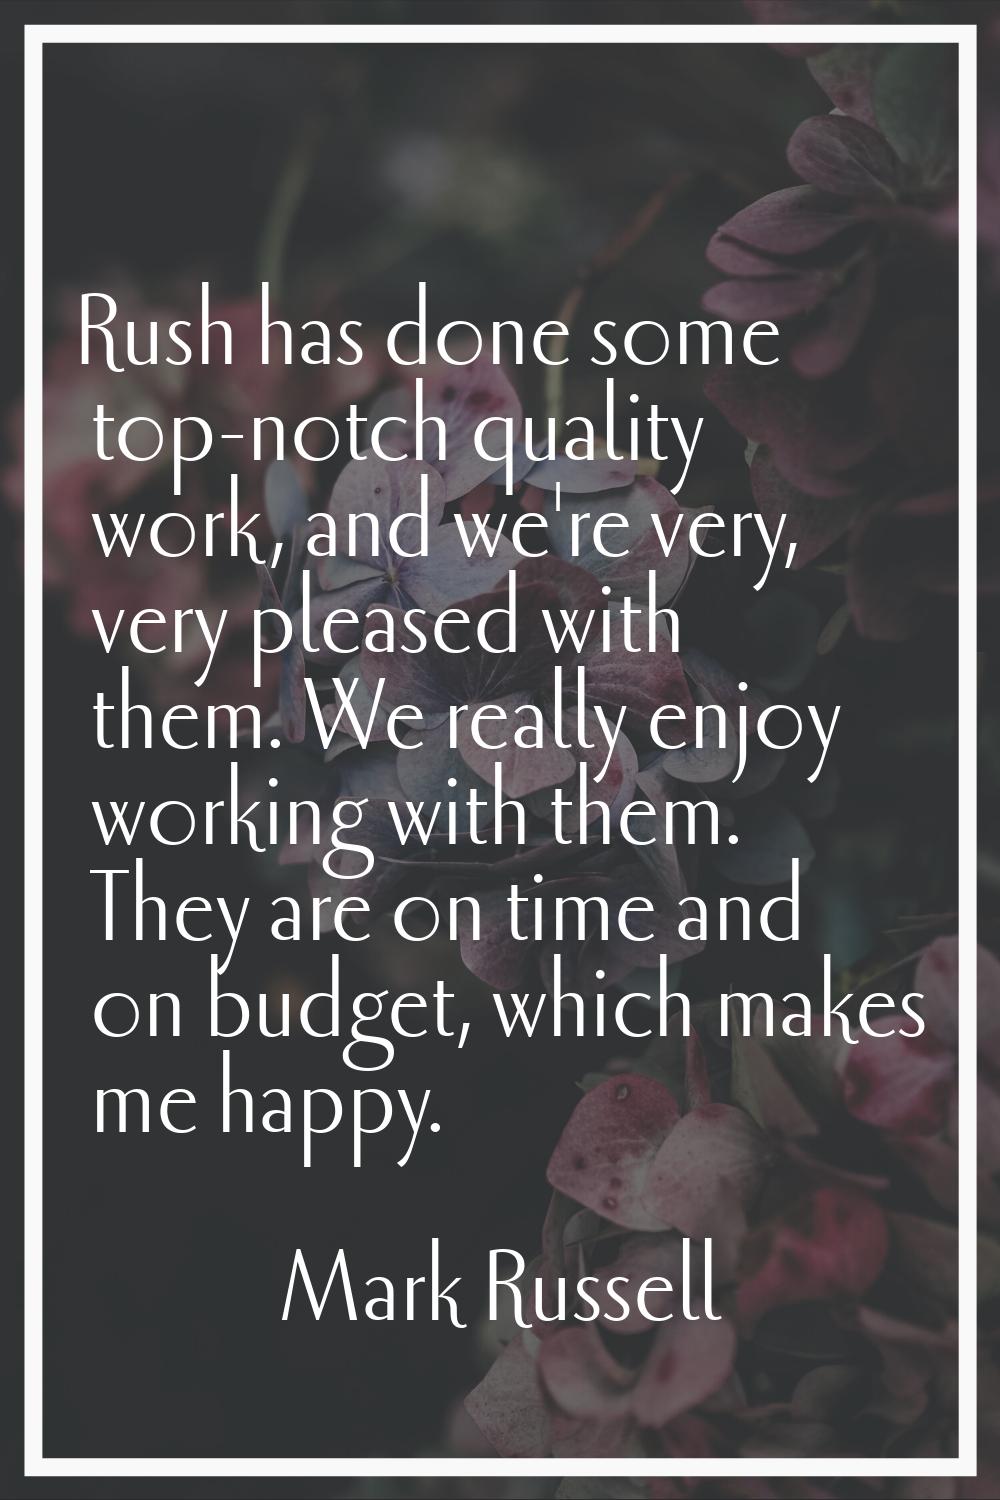 Rush has done some top-notch quality work, and we're very, very pleased with them. We really enjoy 